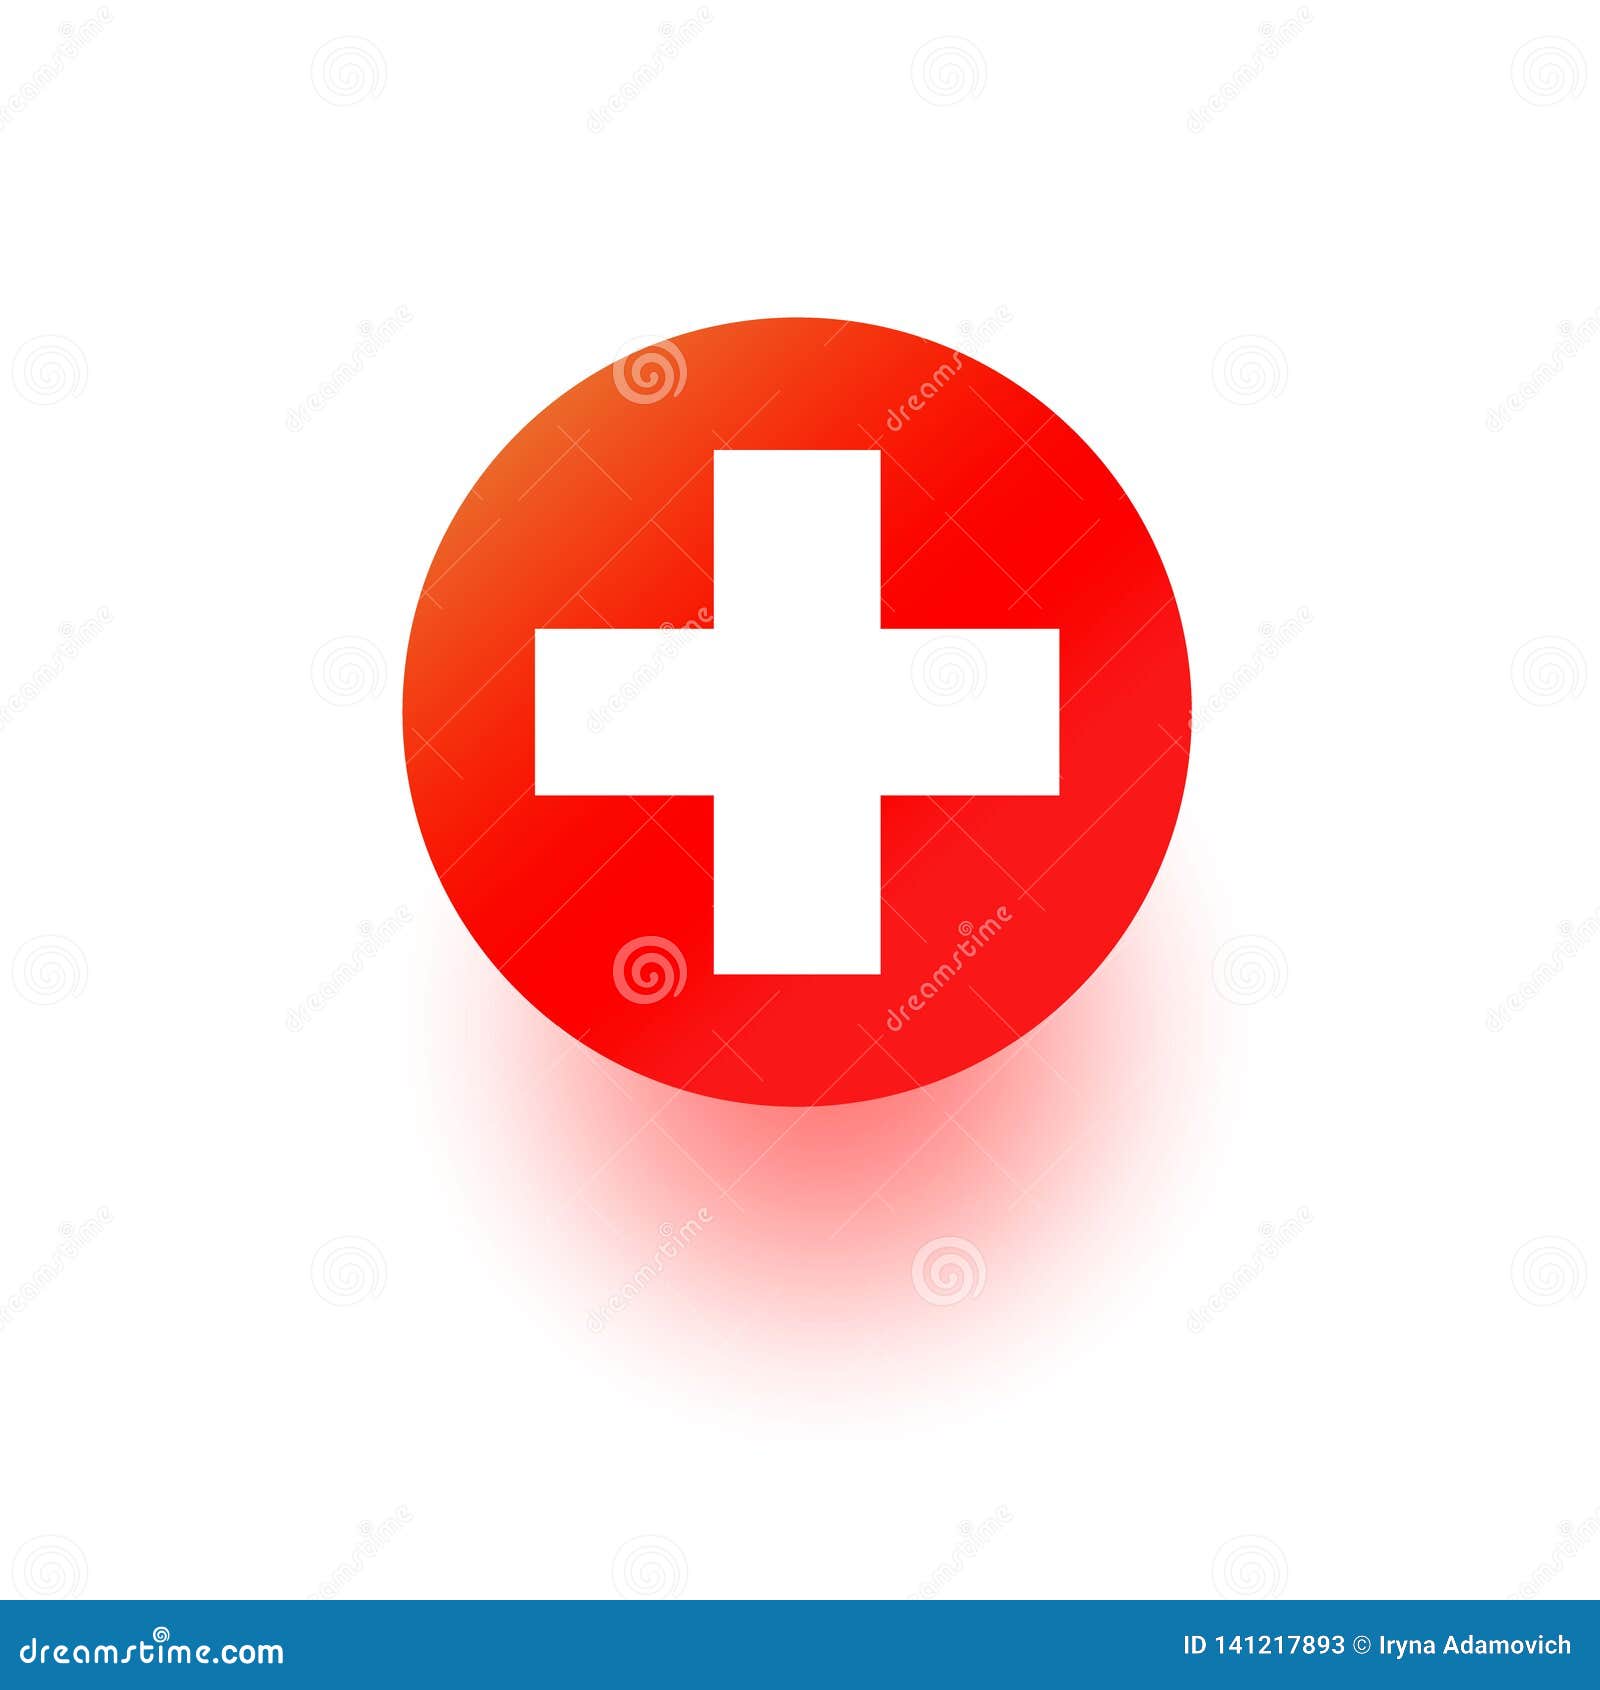 red cross  icon, hospital sign. medical health first aid   on vhite. modern gradient 